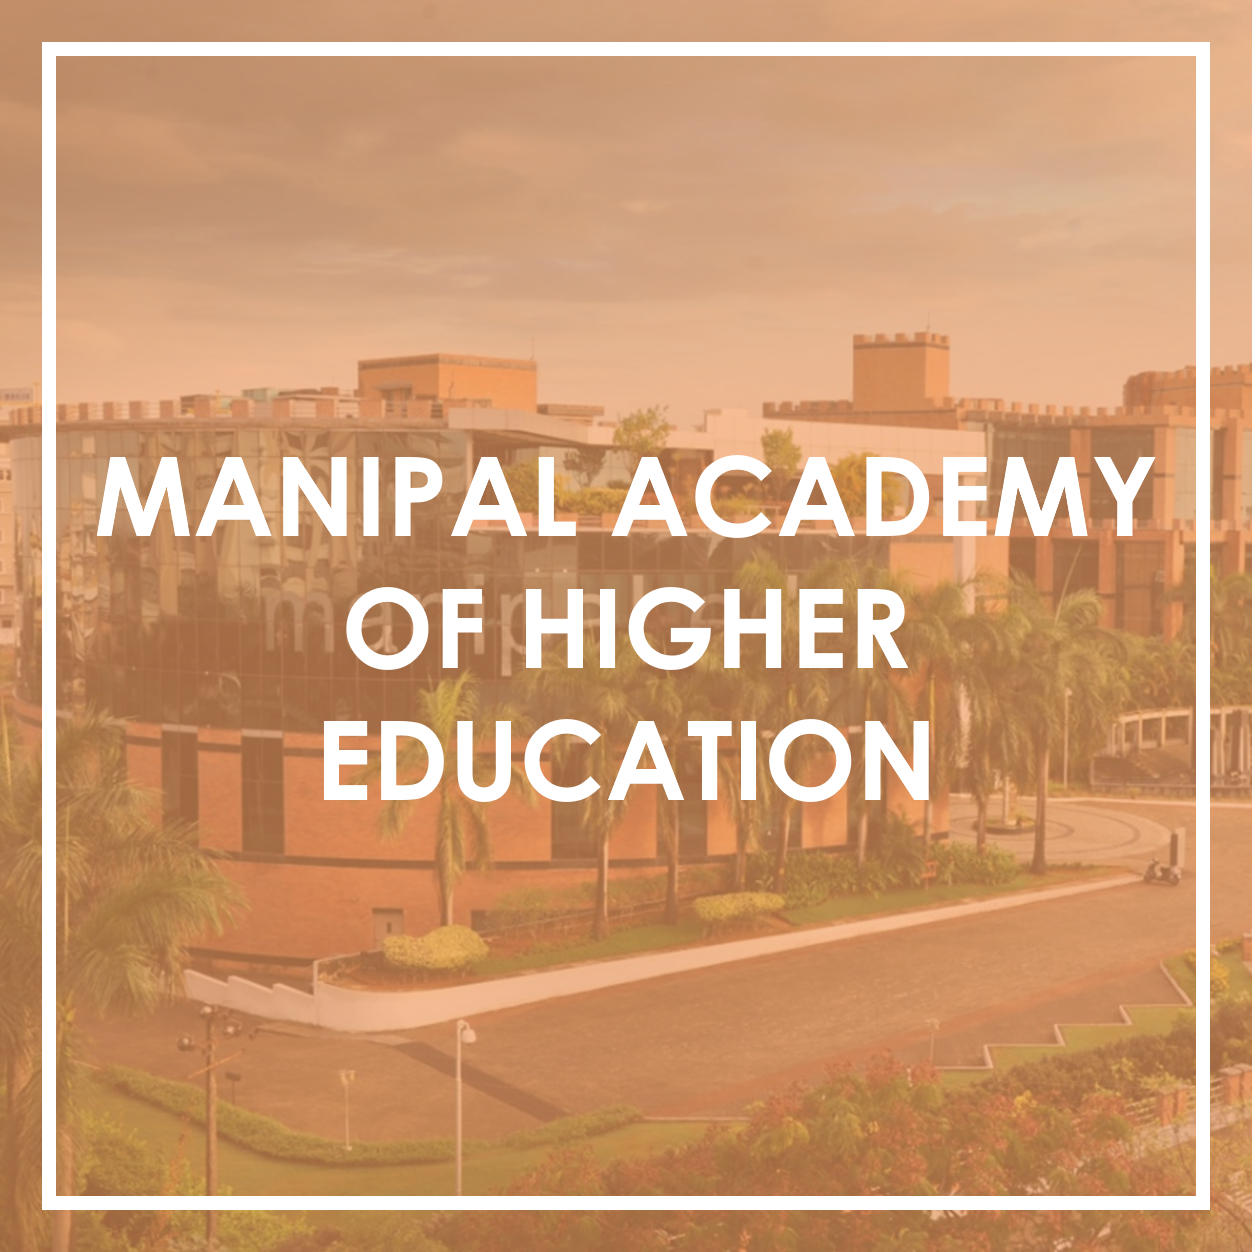 manipal.png